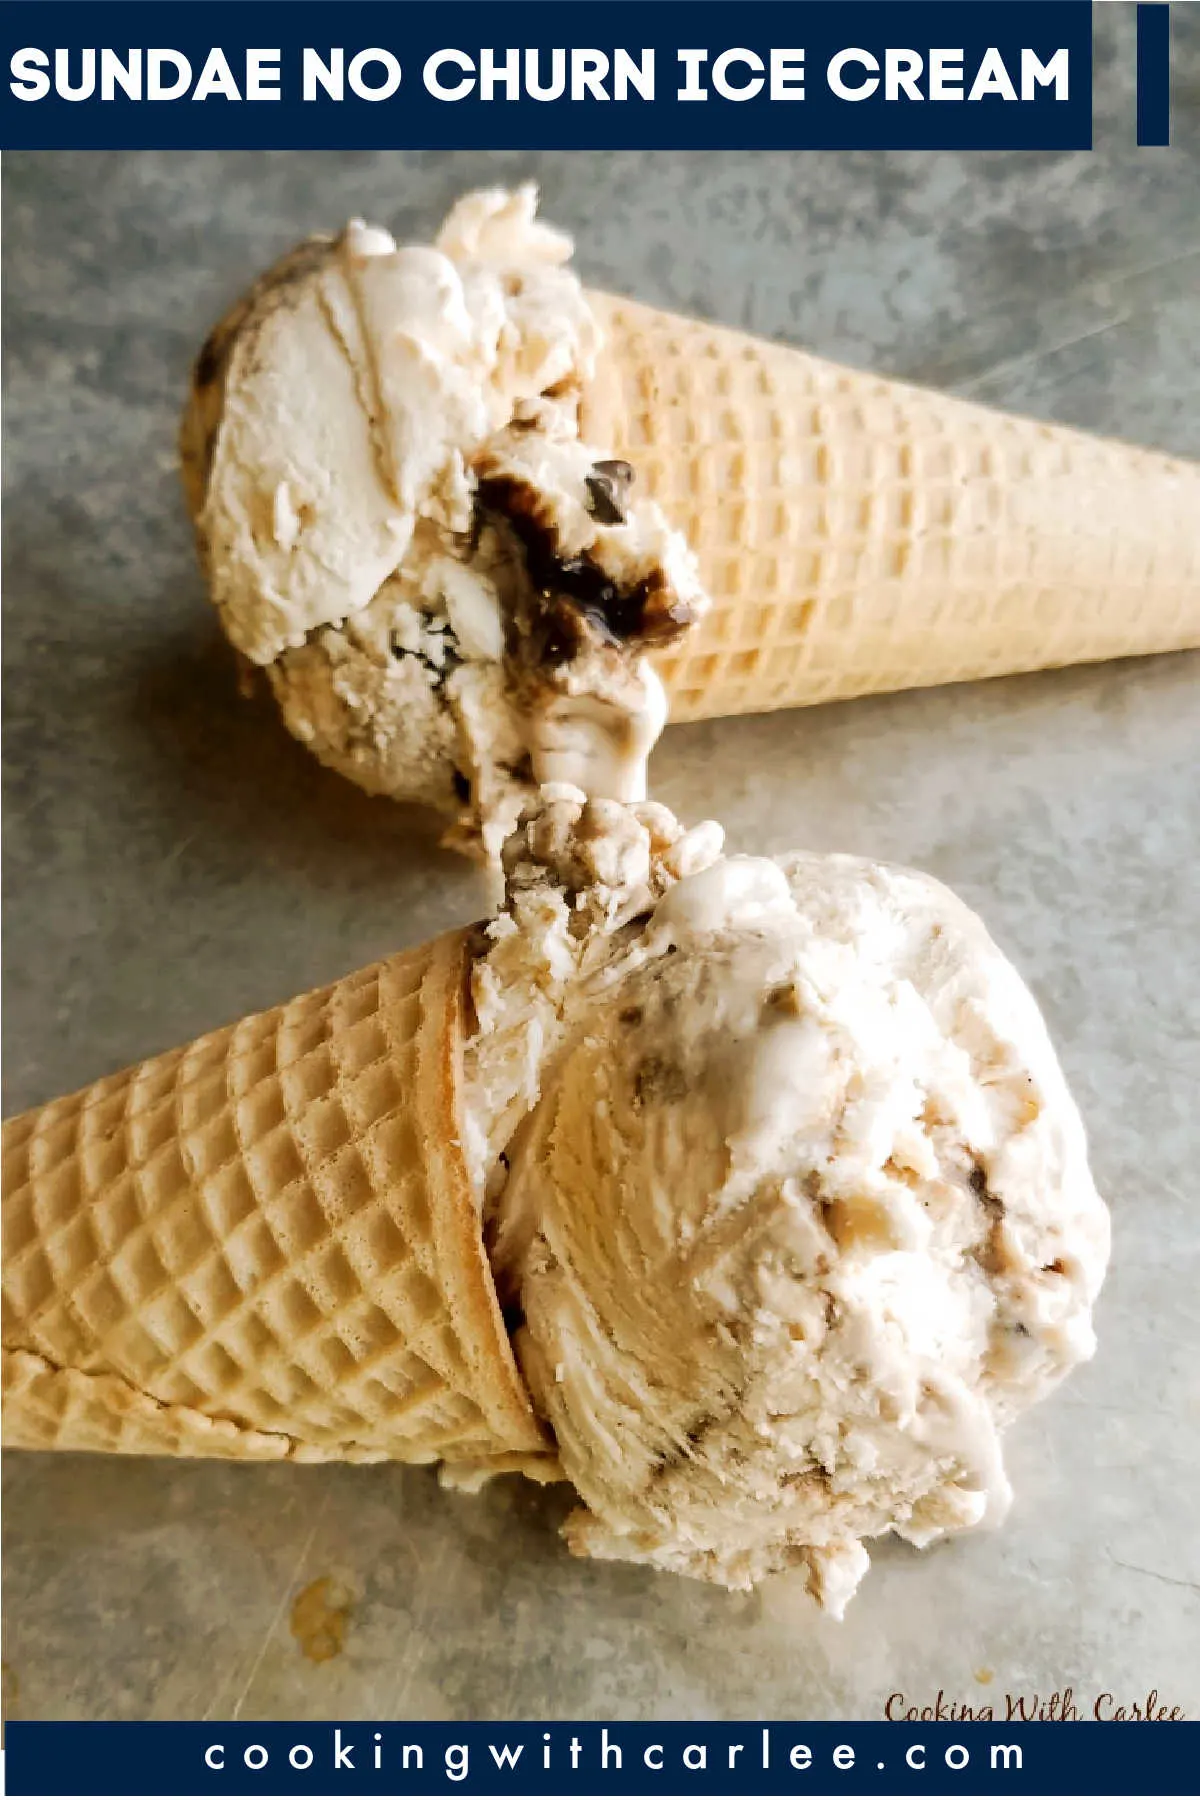 This no churn dulce de leche ice cream doesn’t require any ice cream machine. Plus it has rich caramel notes and chocolate. Add to that bits of sugar cone and you are really in business. it’s like eating your favorite sundae cone in every bite!